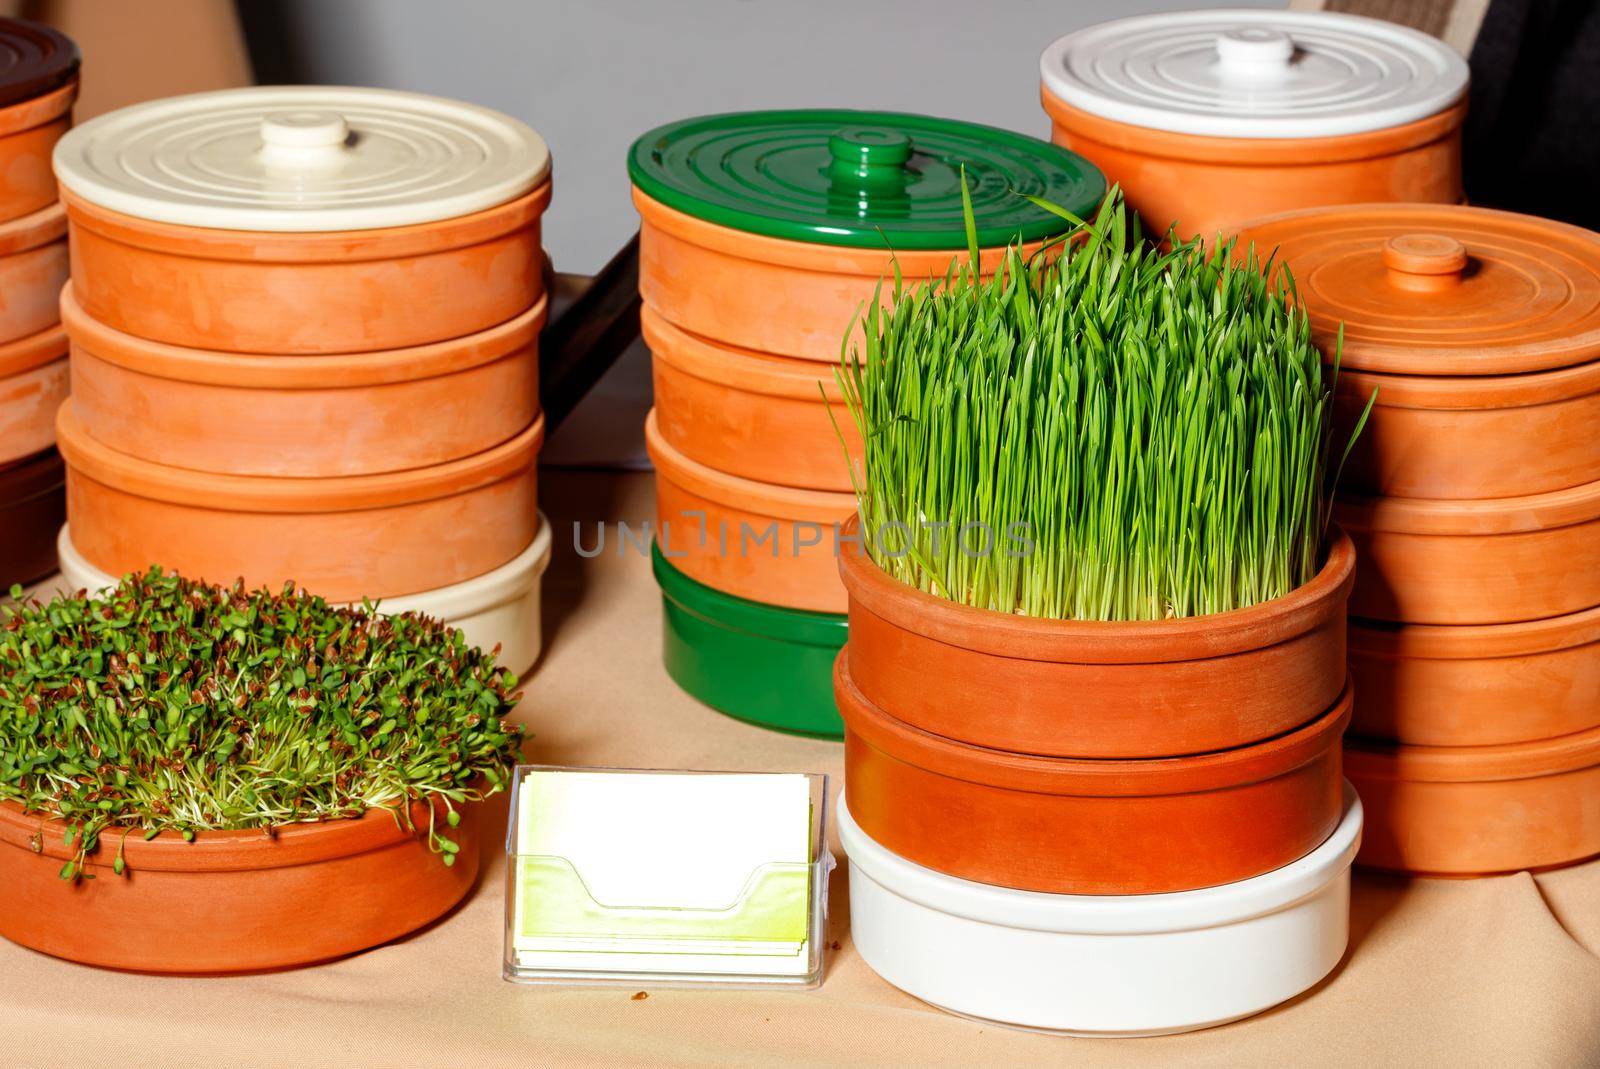 Green wheat sprouts and legumes in special clay containers, fitness diet, healthy diet, natural, close-up, copy space.